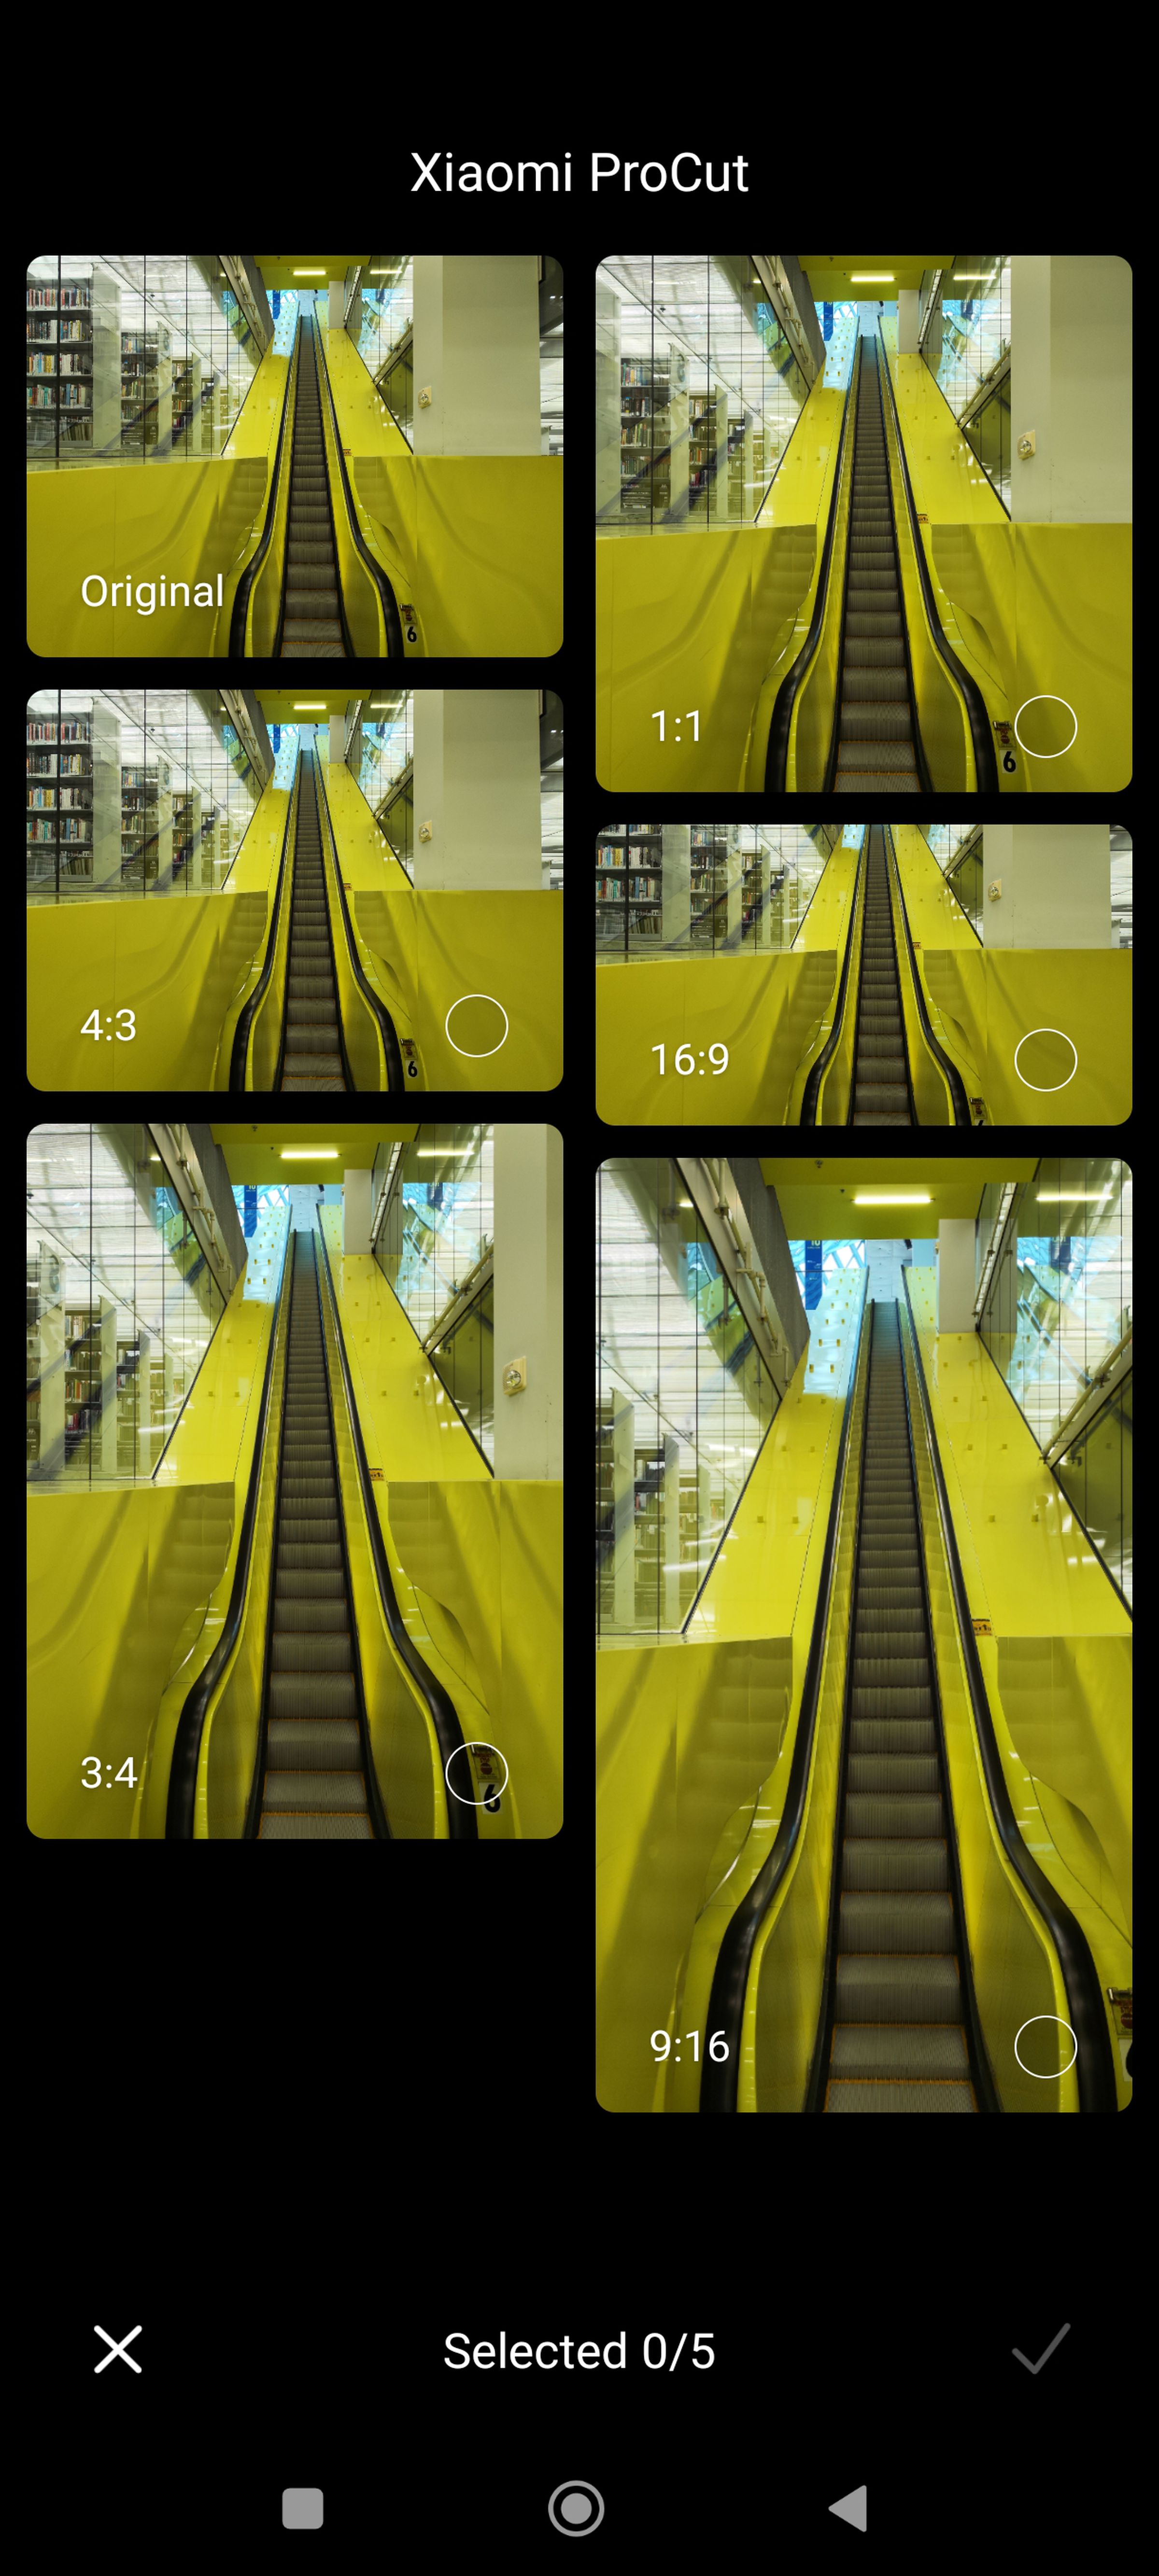 Screenshot of an image of a yellow escalator in multiple image formats.